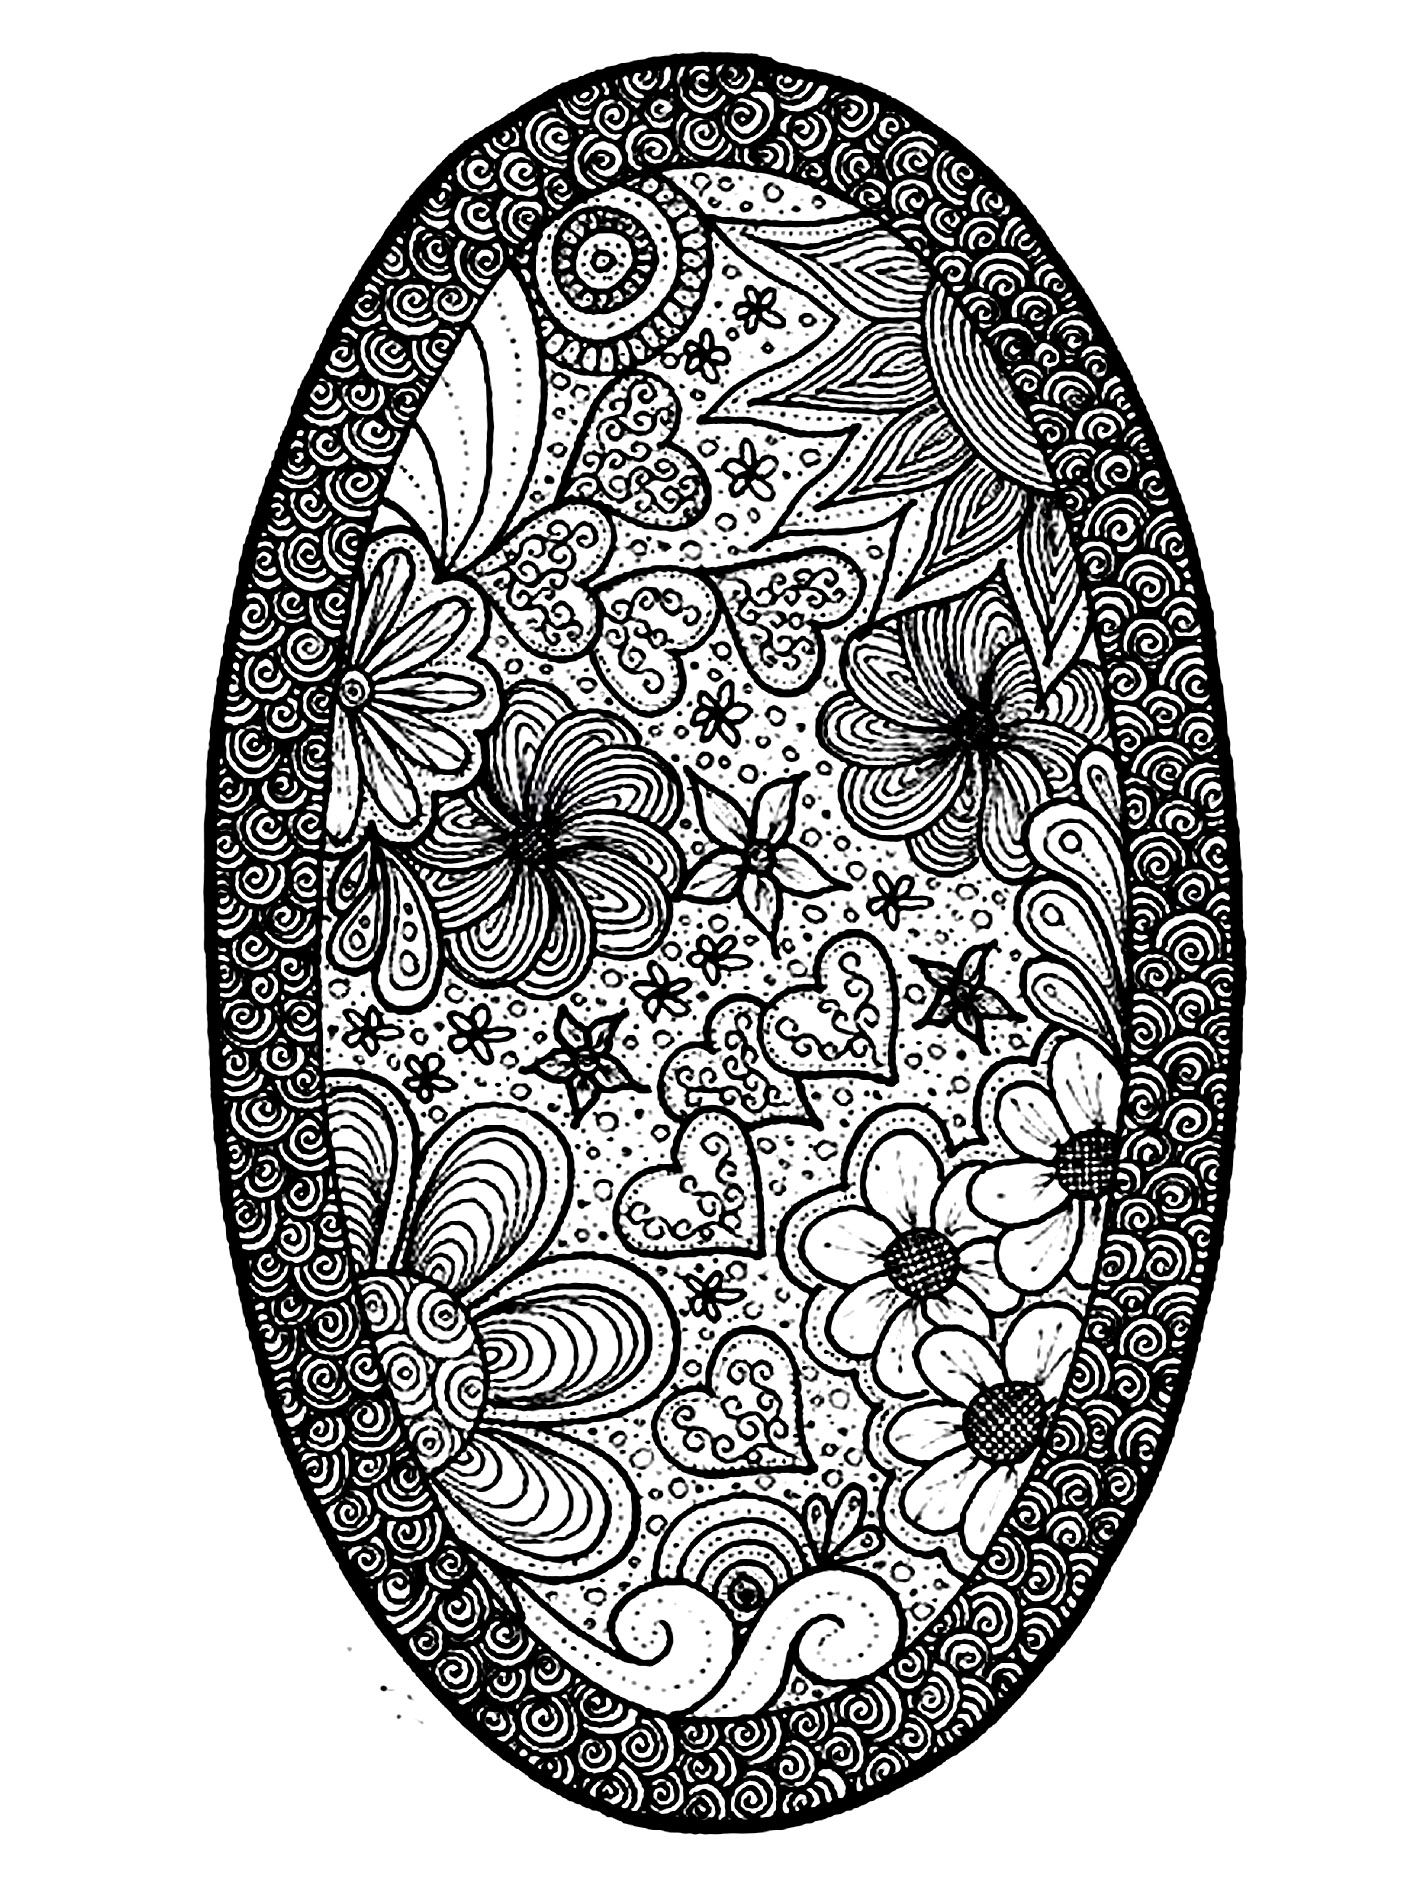 Flowers, hearts and plant elements in an oval shape